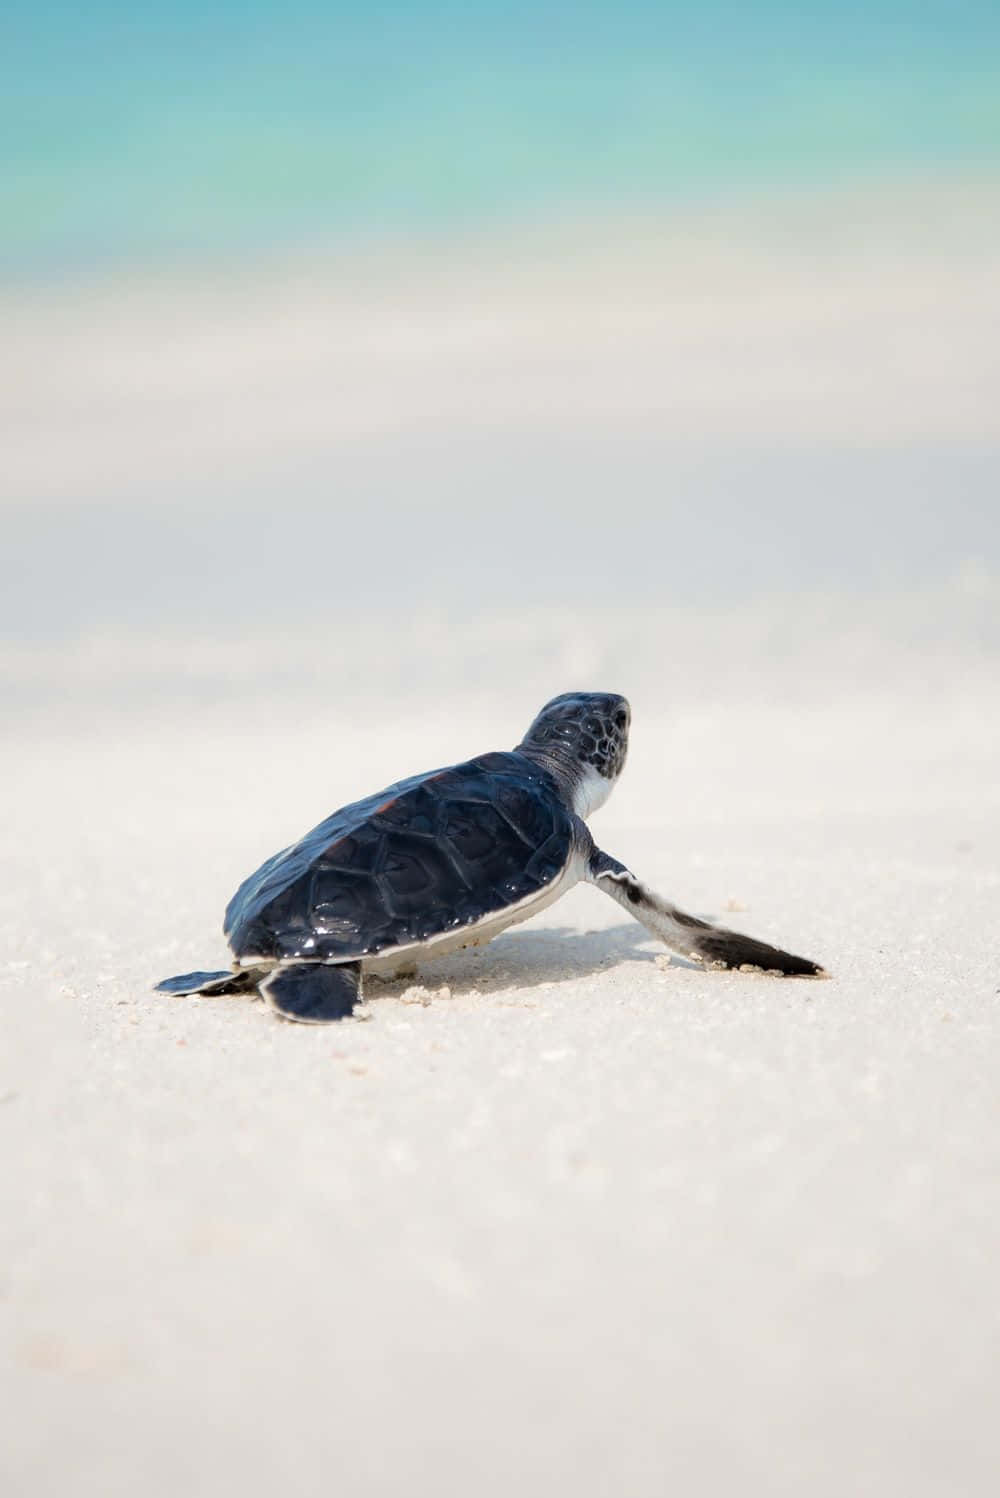 An adorable baby turtle swims in the ocean. Wallpaper